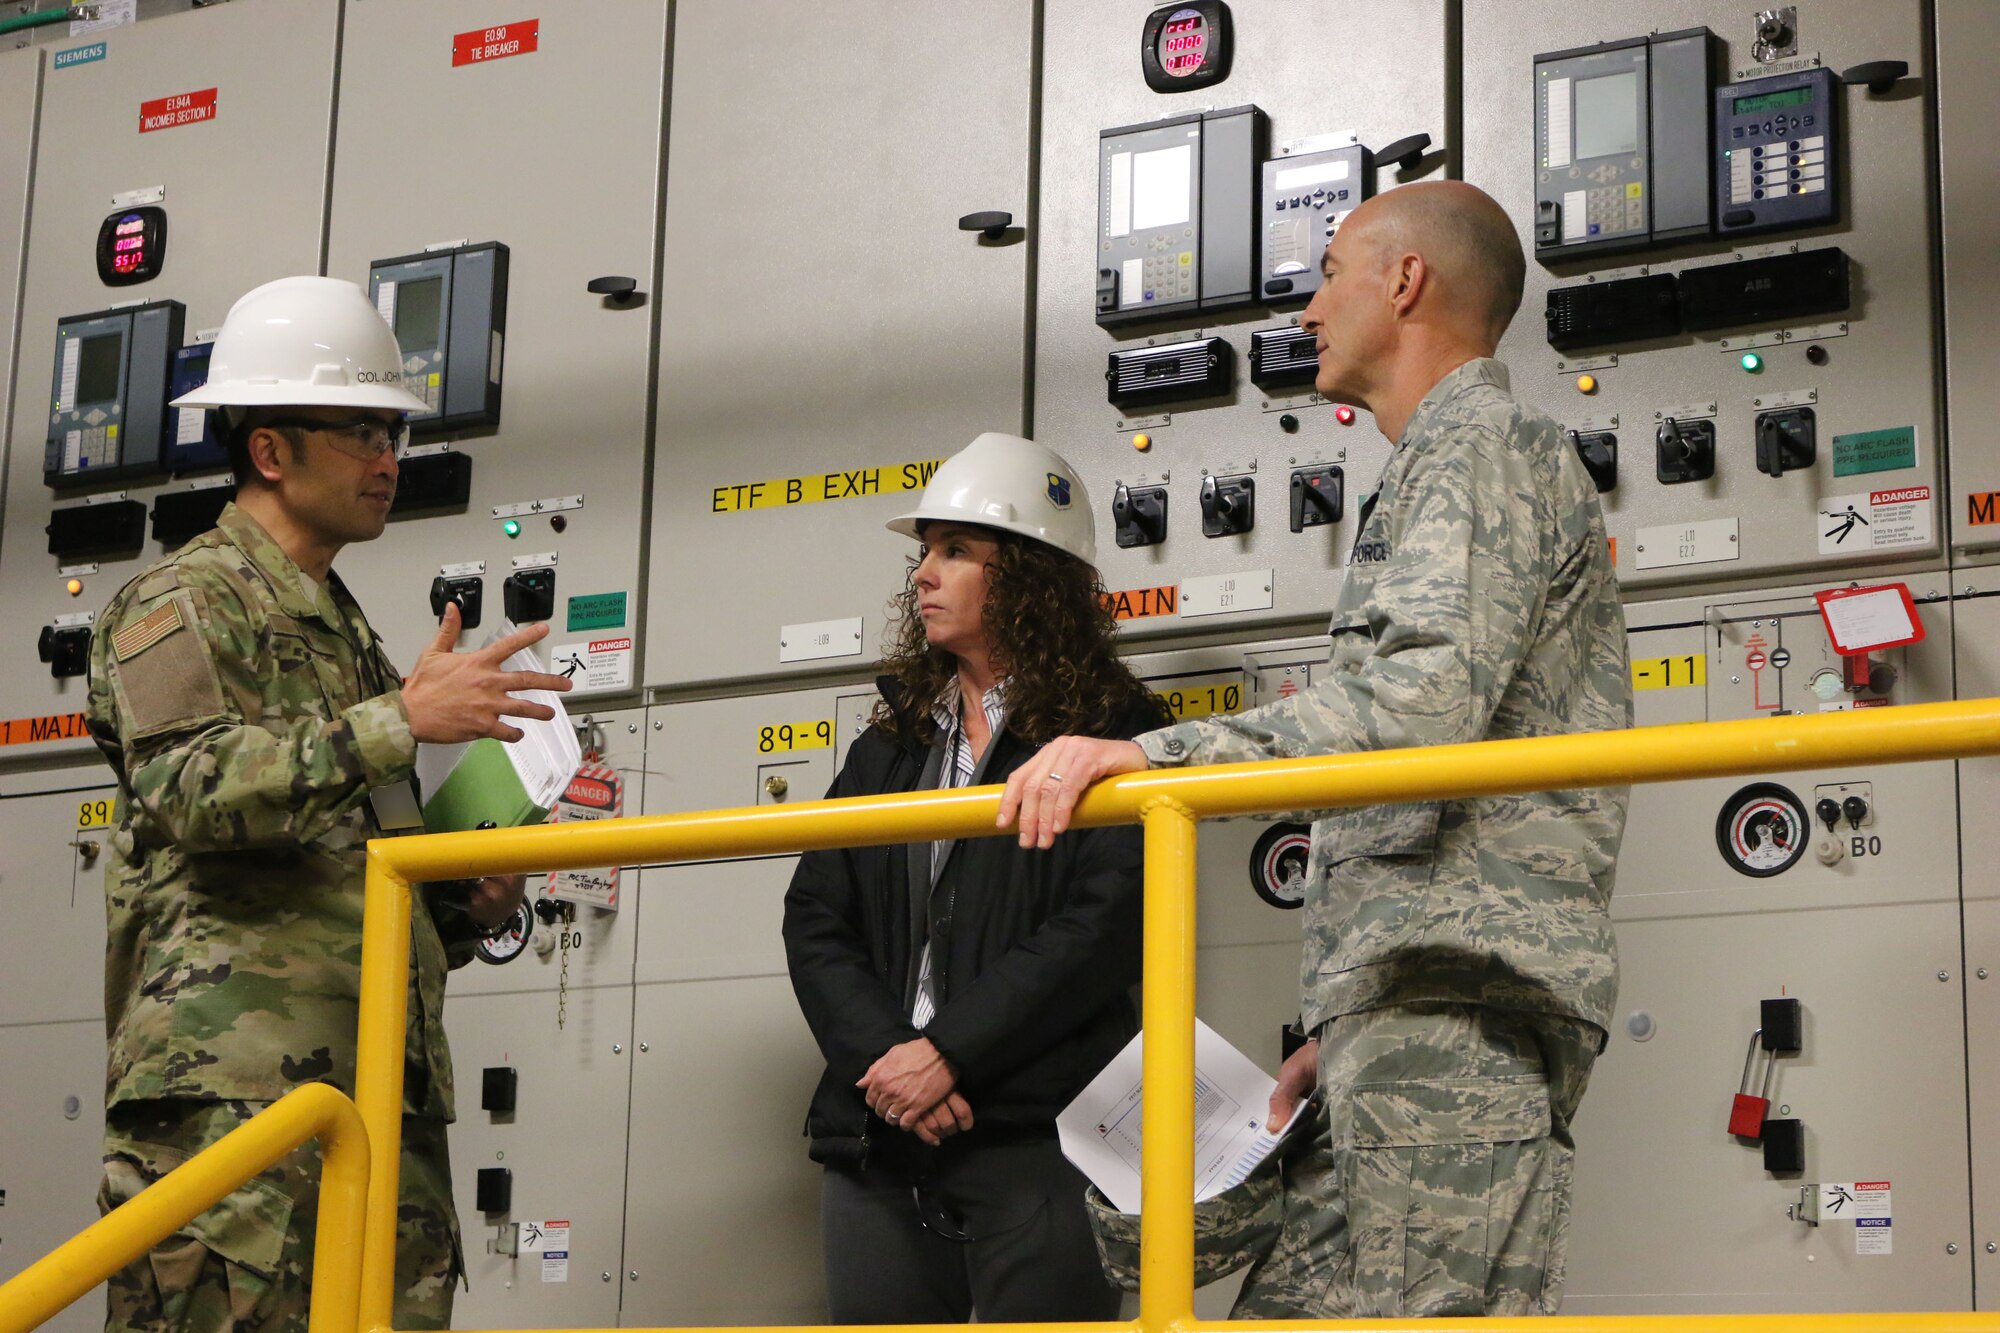 AEDC Test Systems Sustainment Chief Col. John Tran, left, and TSS Capital Improvement Lead Engineer and Service Life Extension Program Manger Kathleen Bajar show Brig. Gen. Christopher Azzano, commander of the Air Force Test Center, the mechanical systems used in the Engine Test Facility at Arnold Air Force Base. Azzano and other AFTC leadership visited Arnold Air Force Base in mid-November to take part in the 2018 AFTC Strategic Offsite, Azzano’s first offsite since assuming the role of AFTC commander in August. (U.S. Air Force photo by Brad Hicks) (This image was altered by obscuring badges for security purposes)